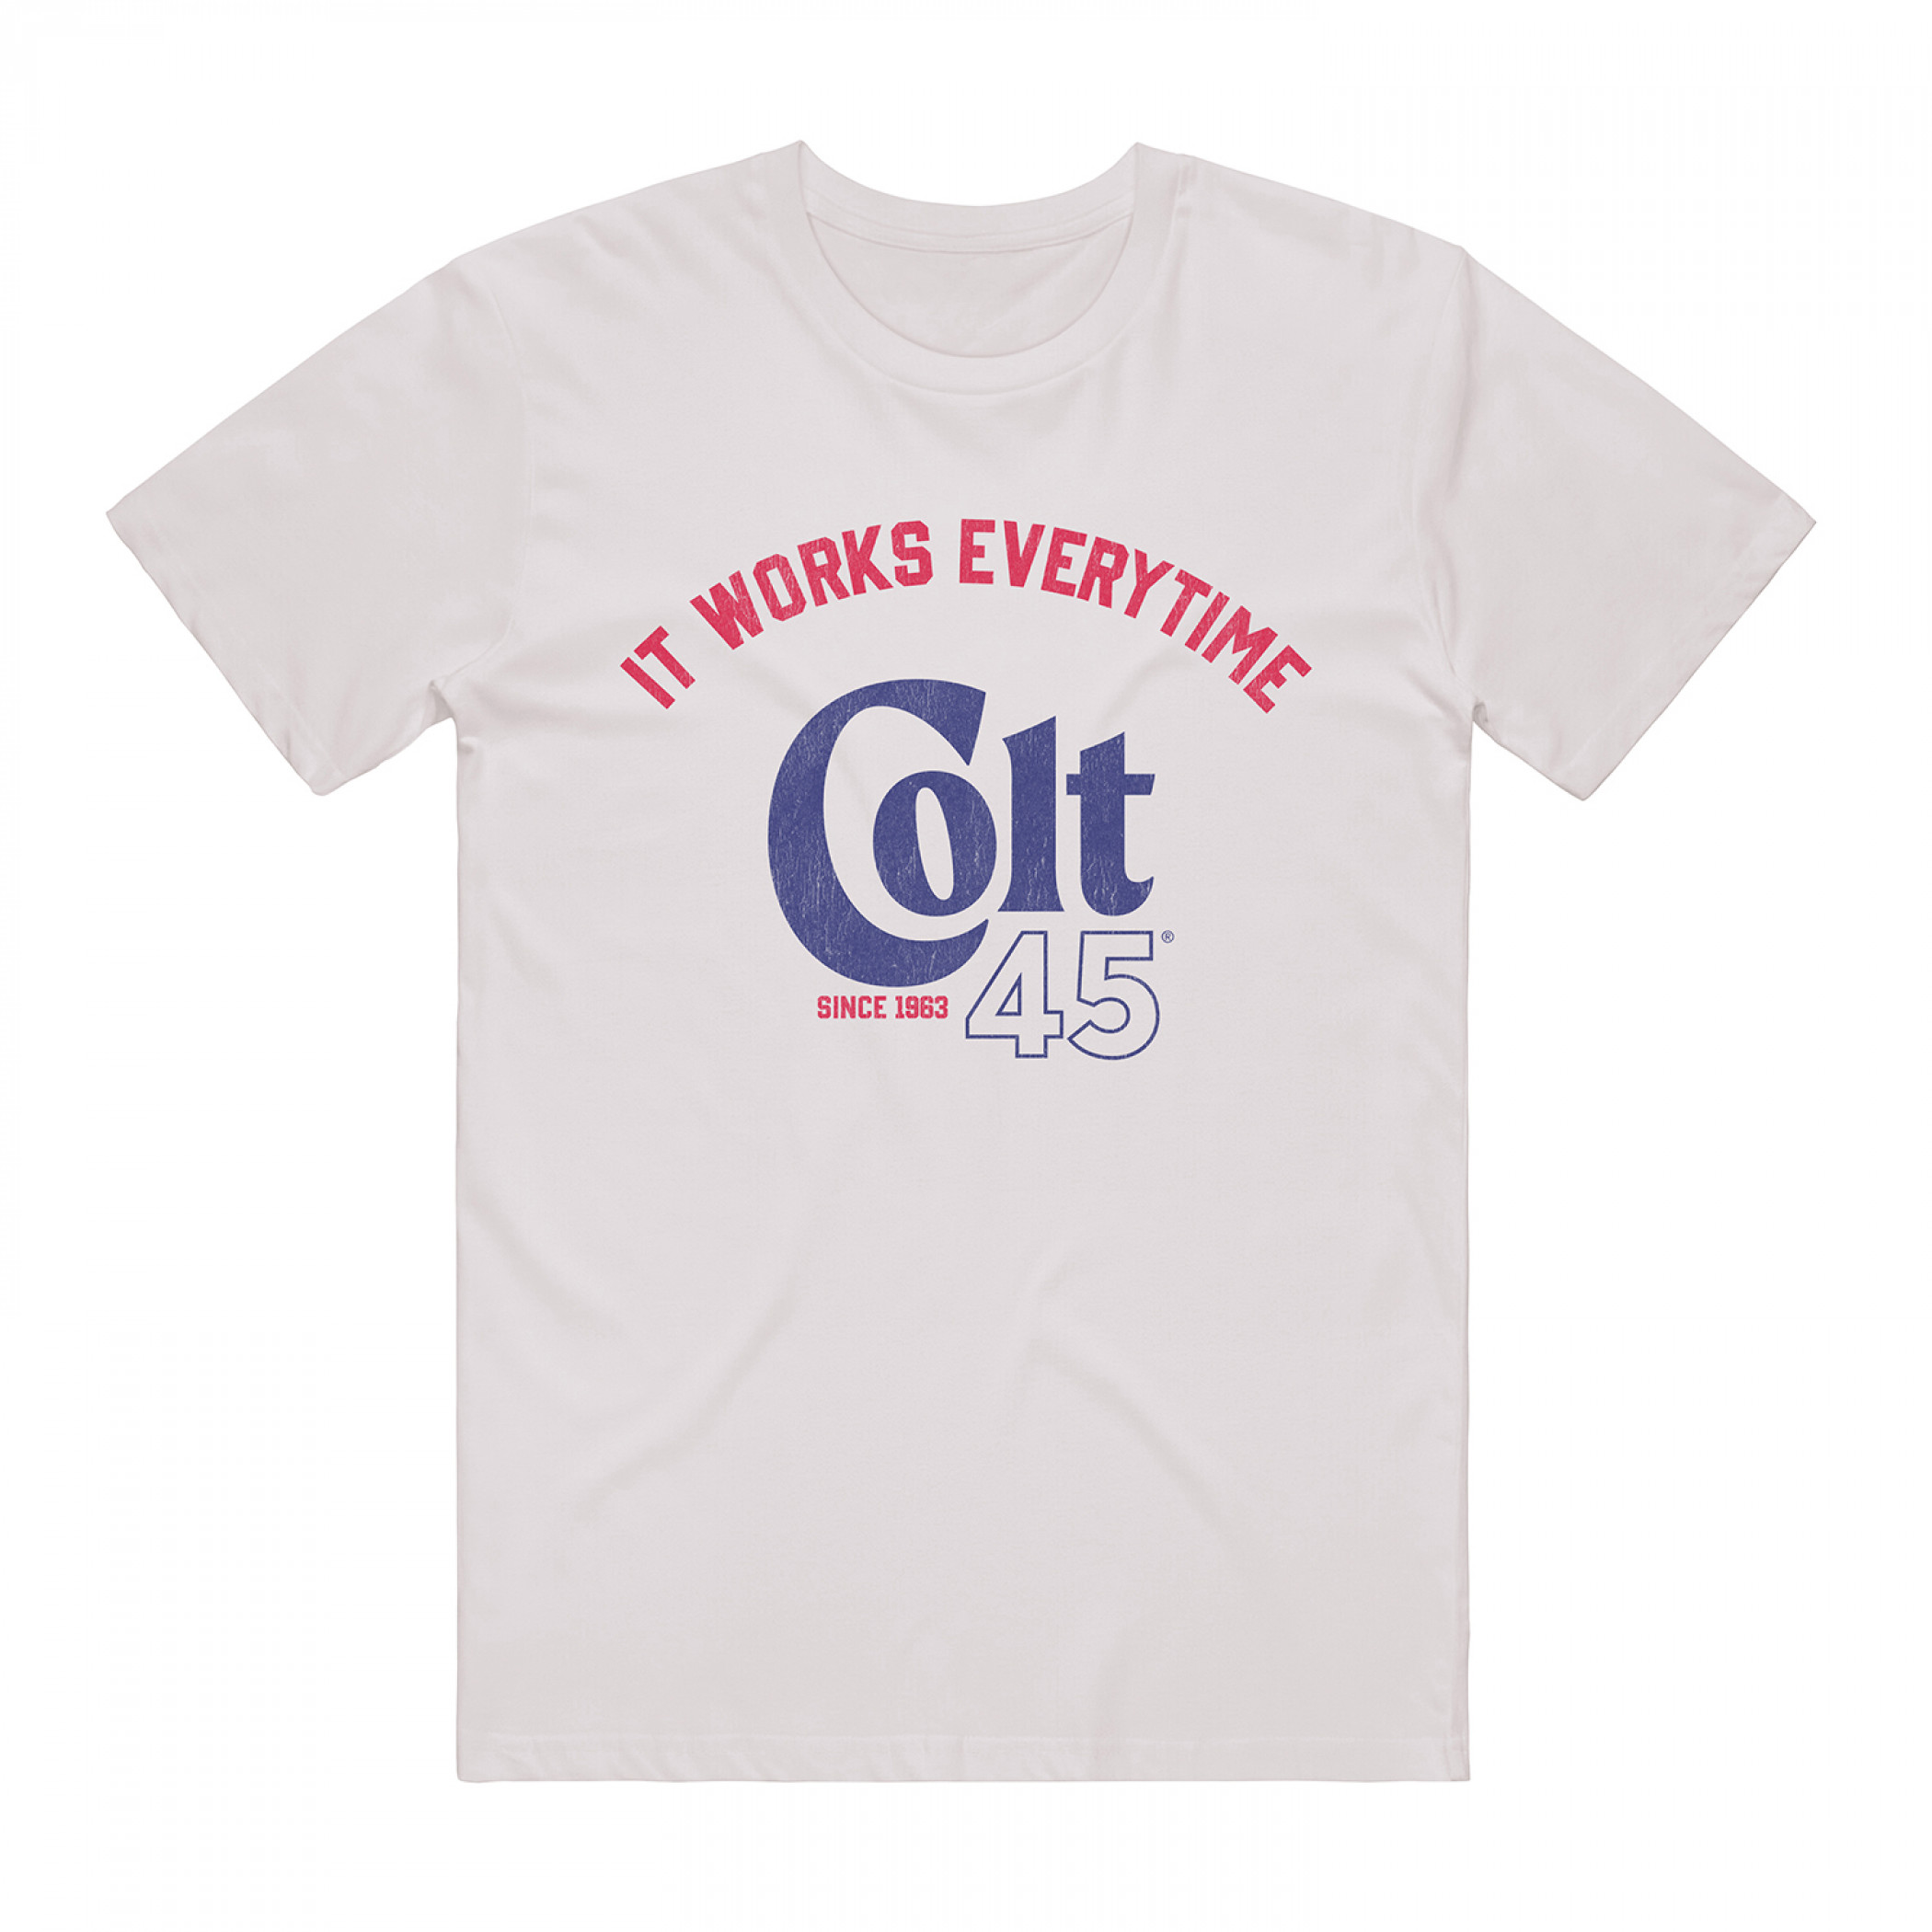 Colt 45 It Works Every Time 80s Slogan T-Shirt